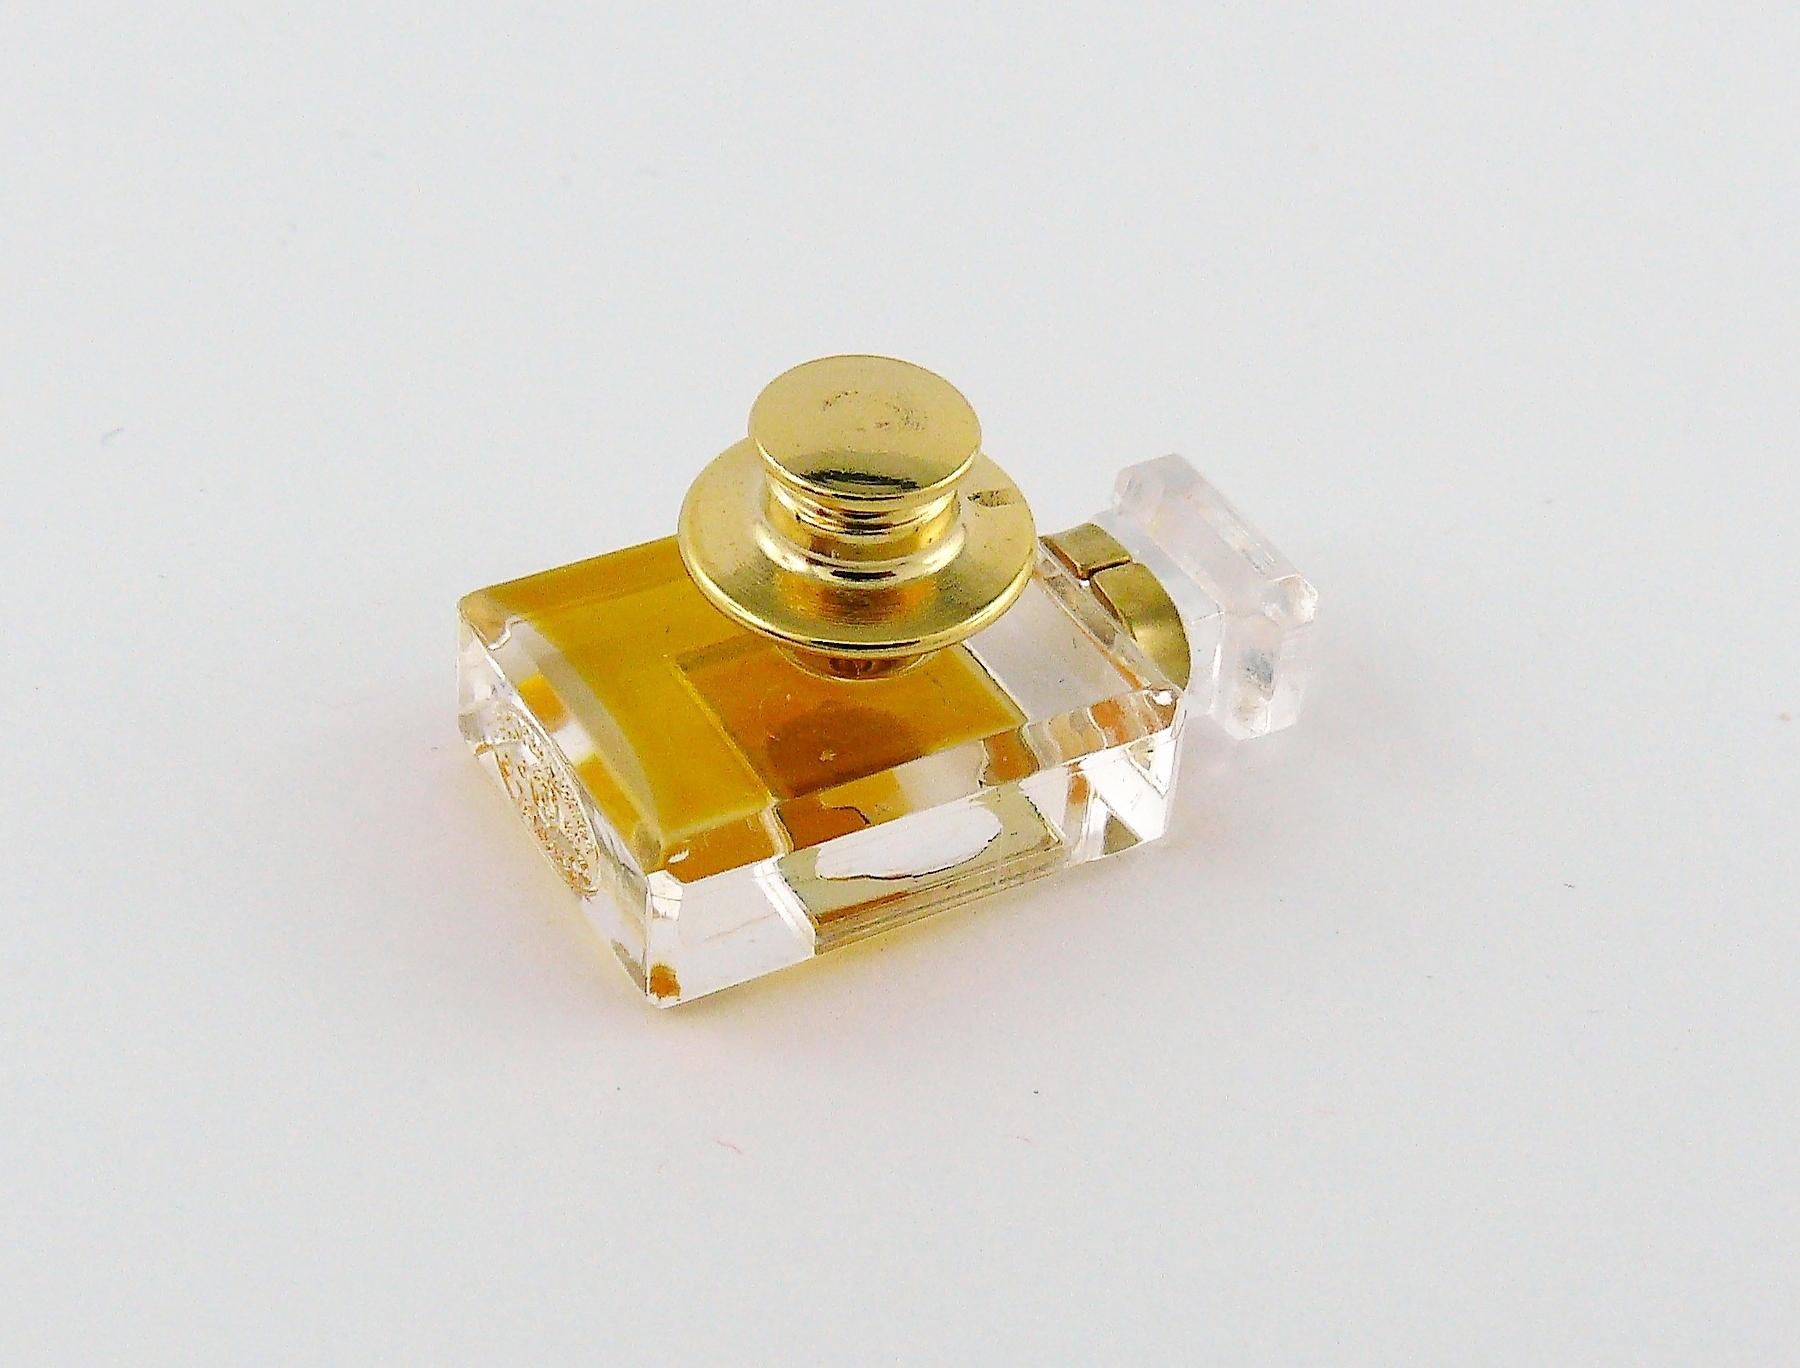 Chanel Iconic No. 5 Perfume Bottle Pin Brooch 3